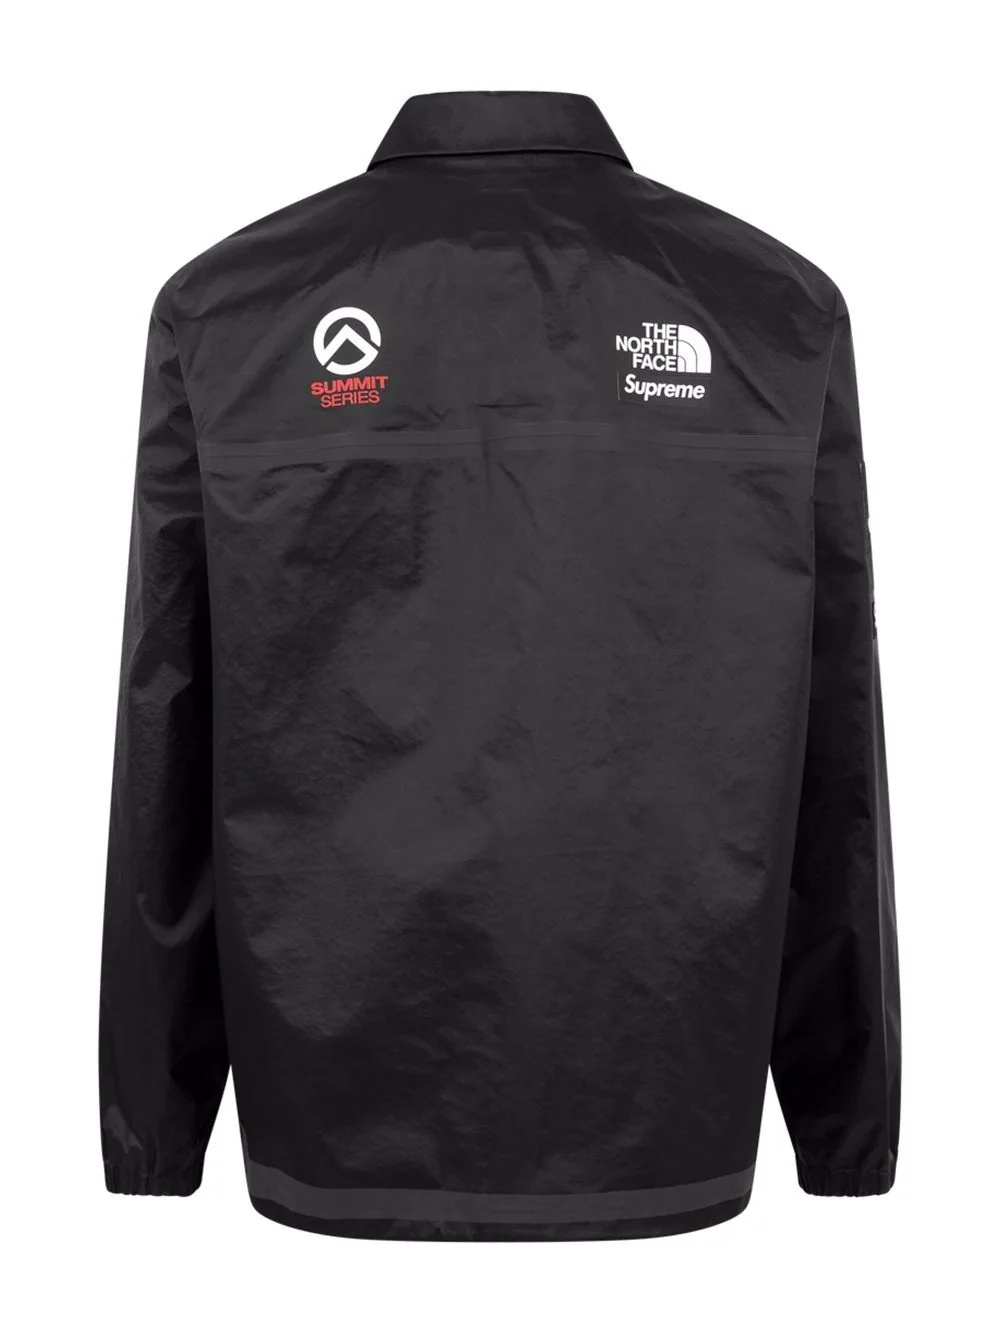 x The North Face Coach jacket "SS 21 Summit Series" - 2